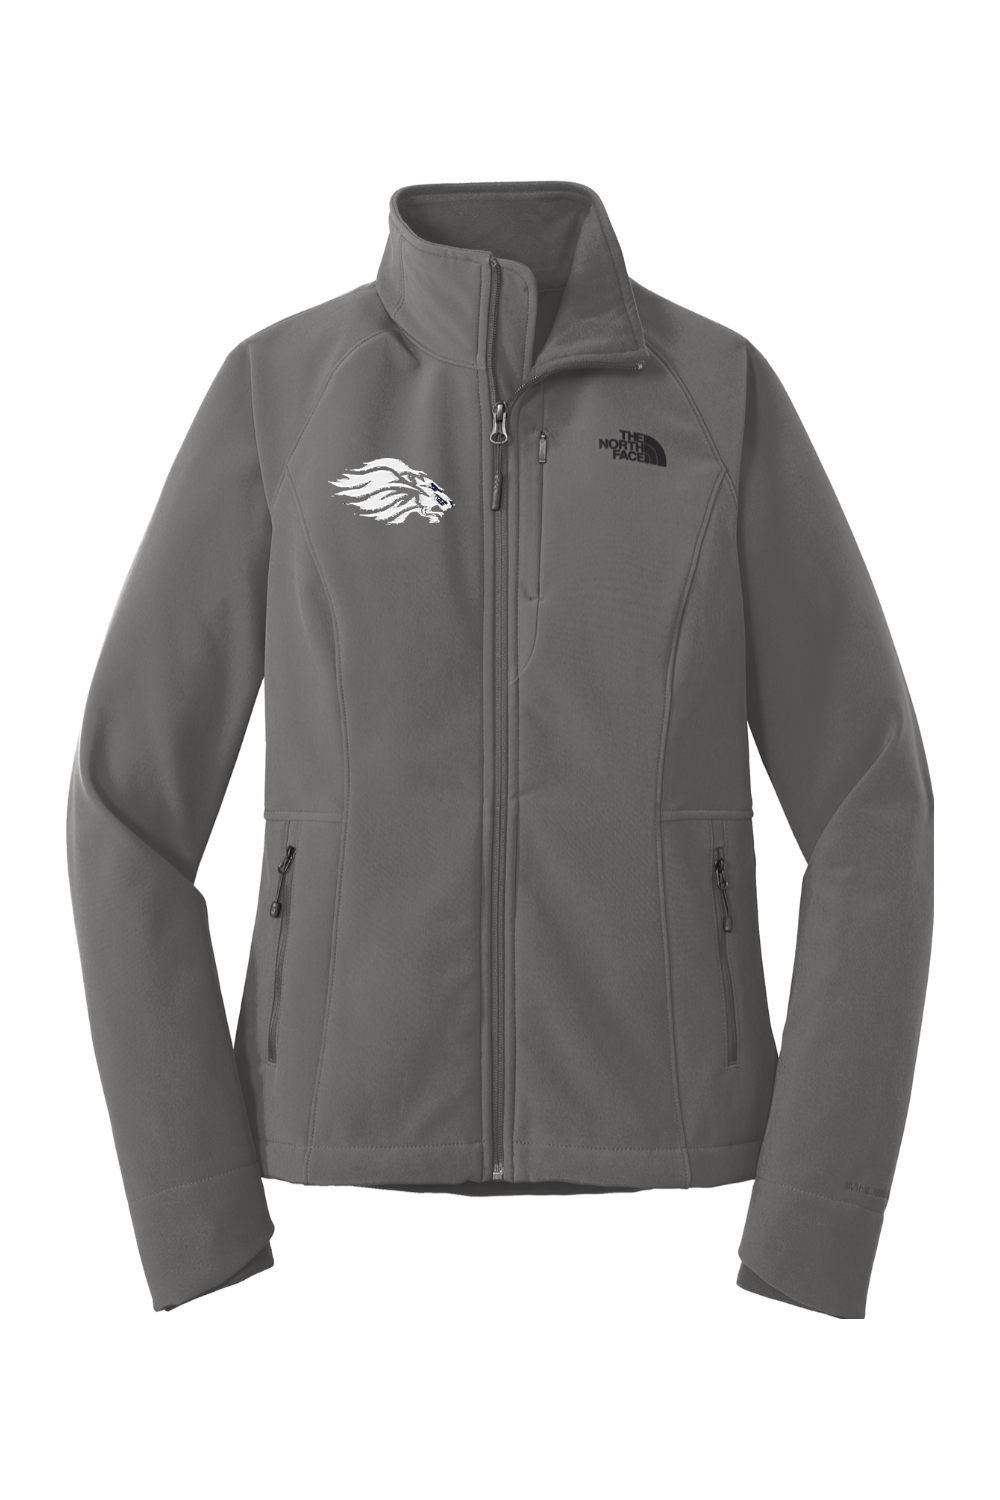 CCCS Lion The North Face Ladies Apex Barrier Soft Shell Jacket